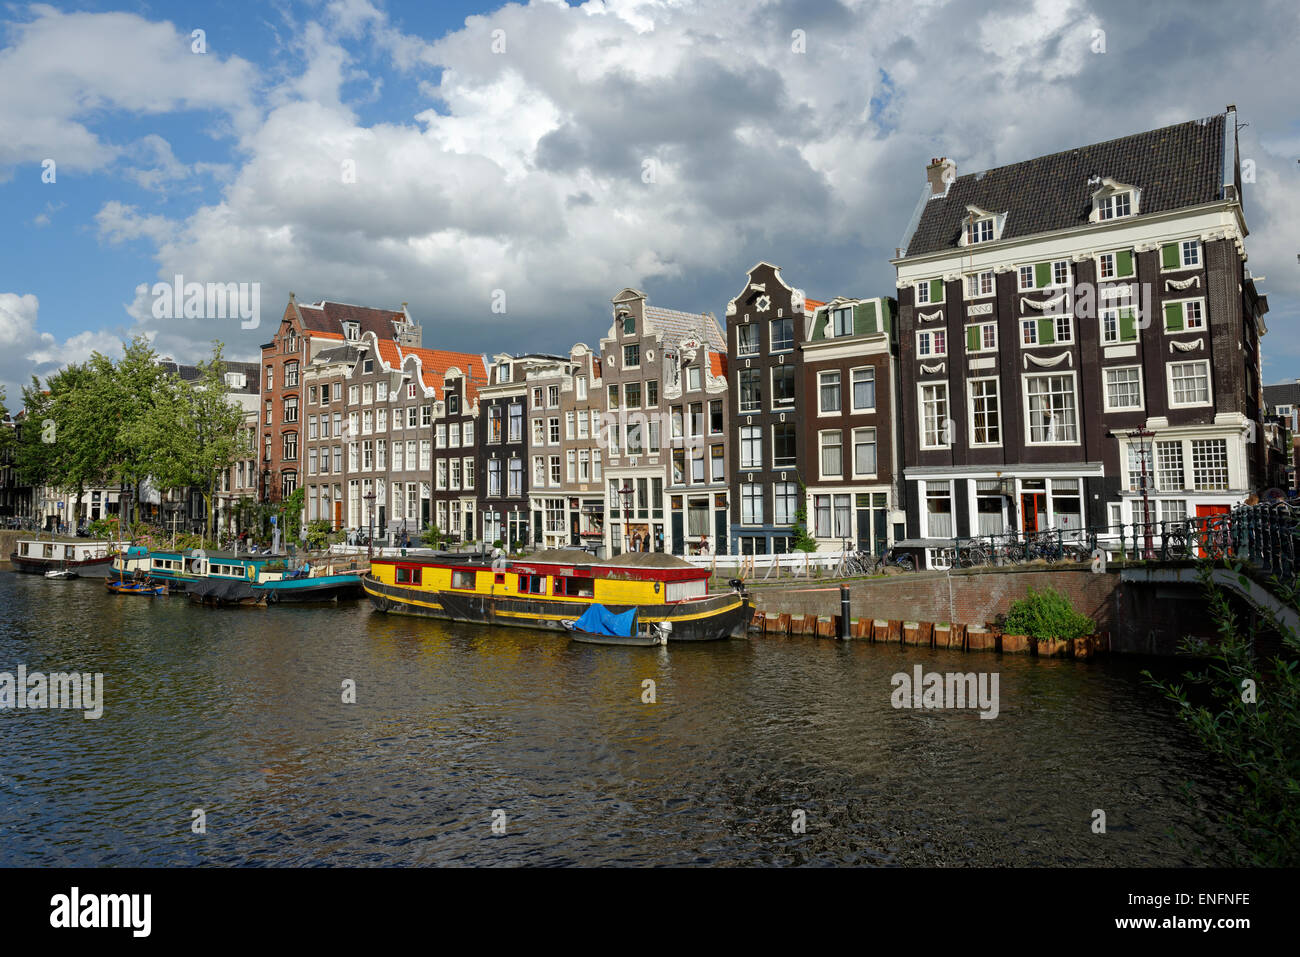 From Blauburgwal towards the Singel Canal, historic centre along the canals, Amsterdam, The Netherlands Stock Photo